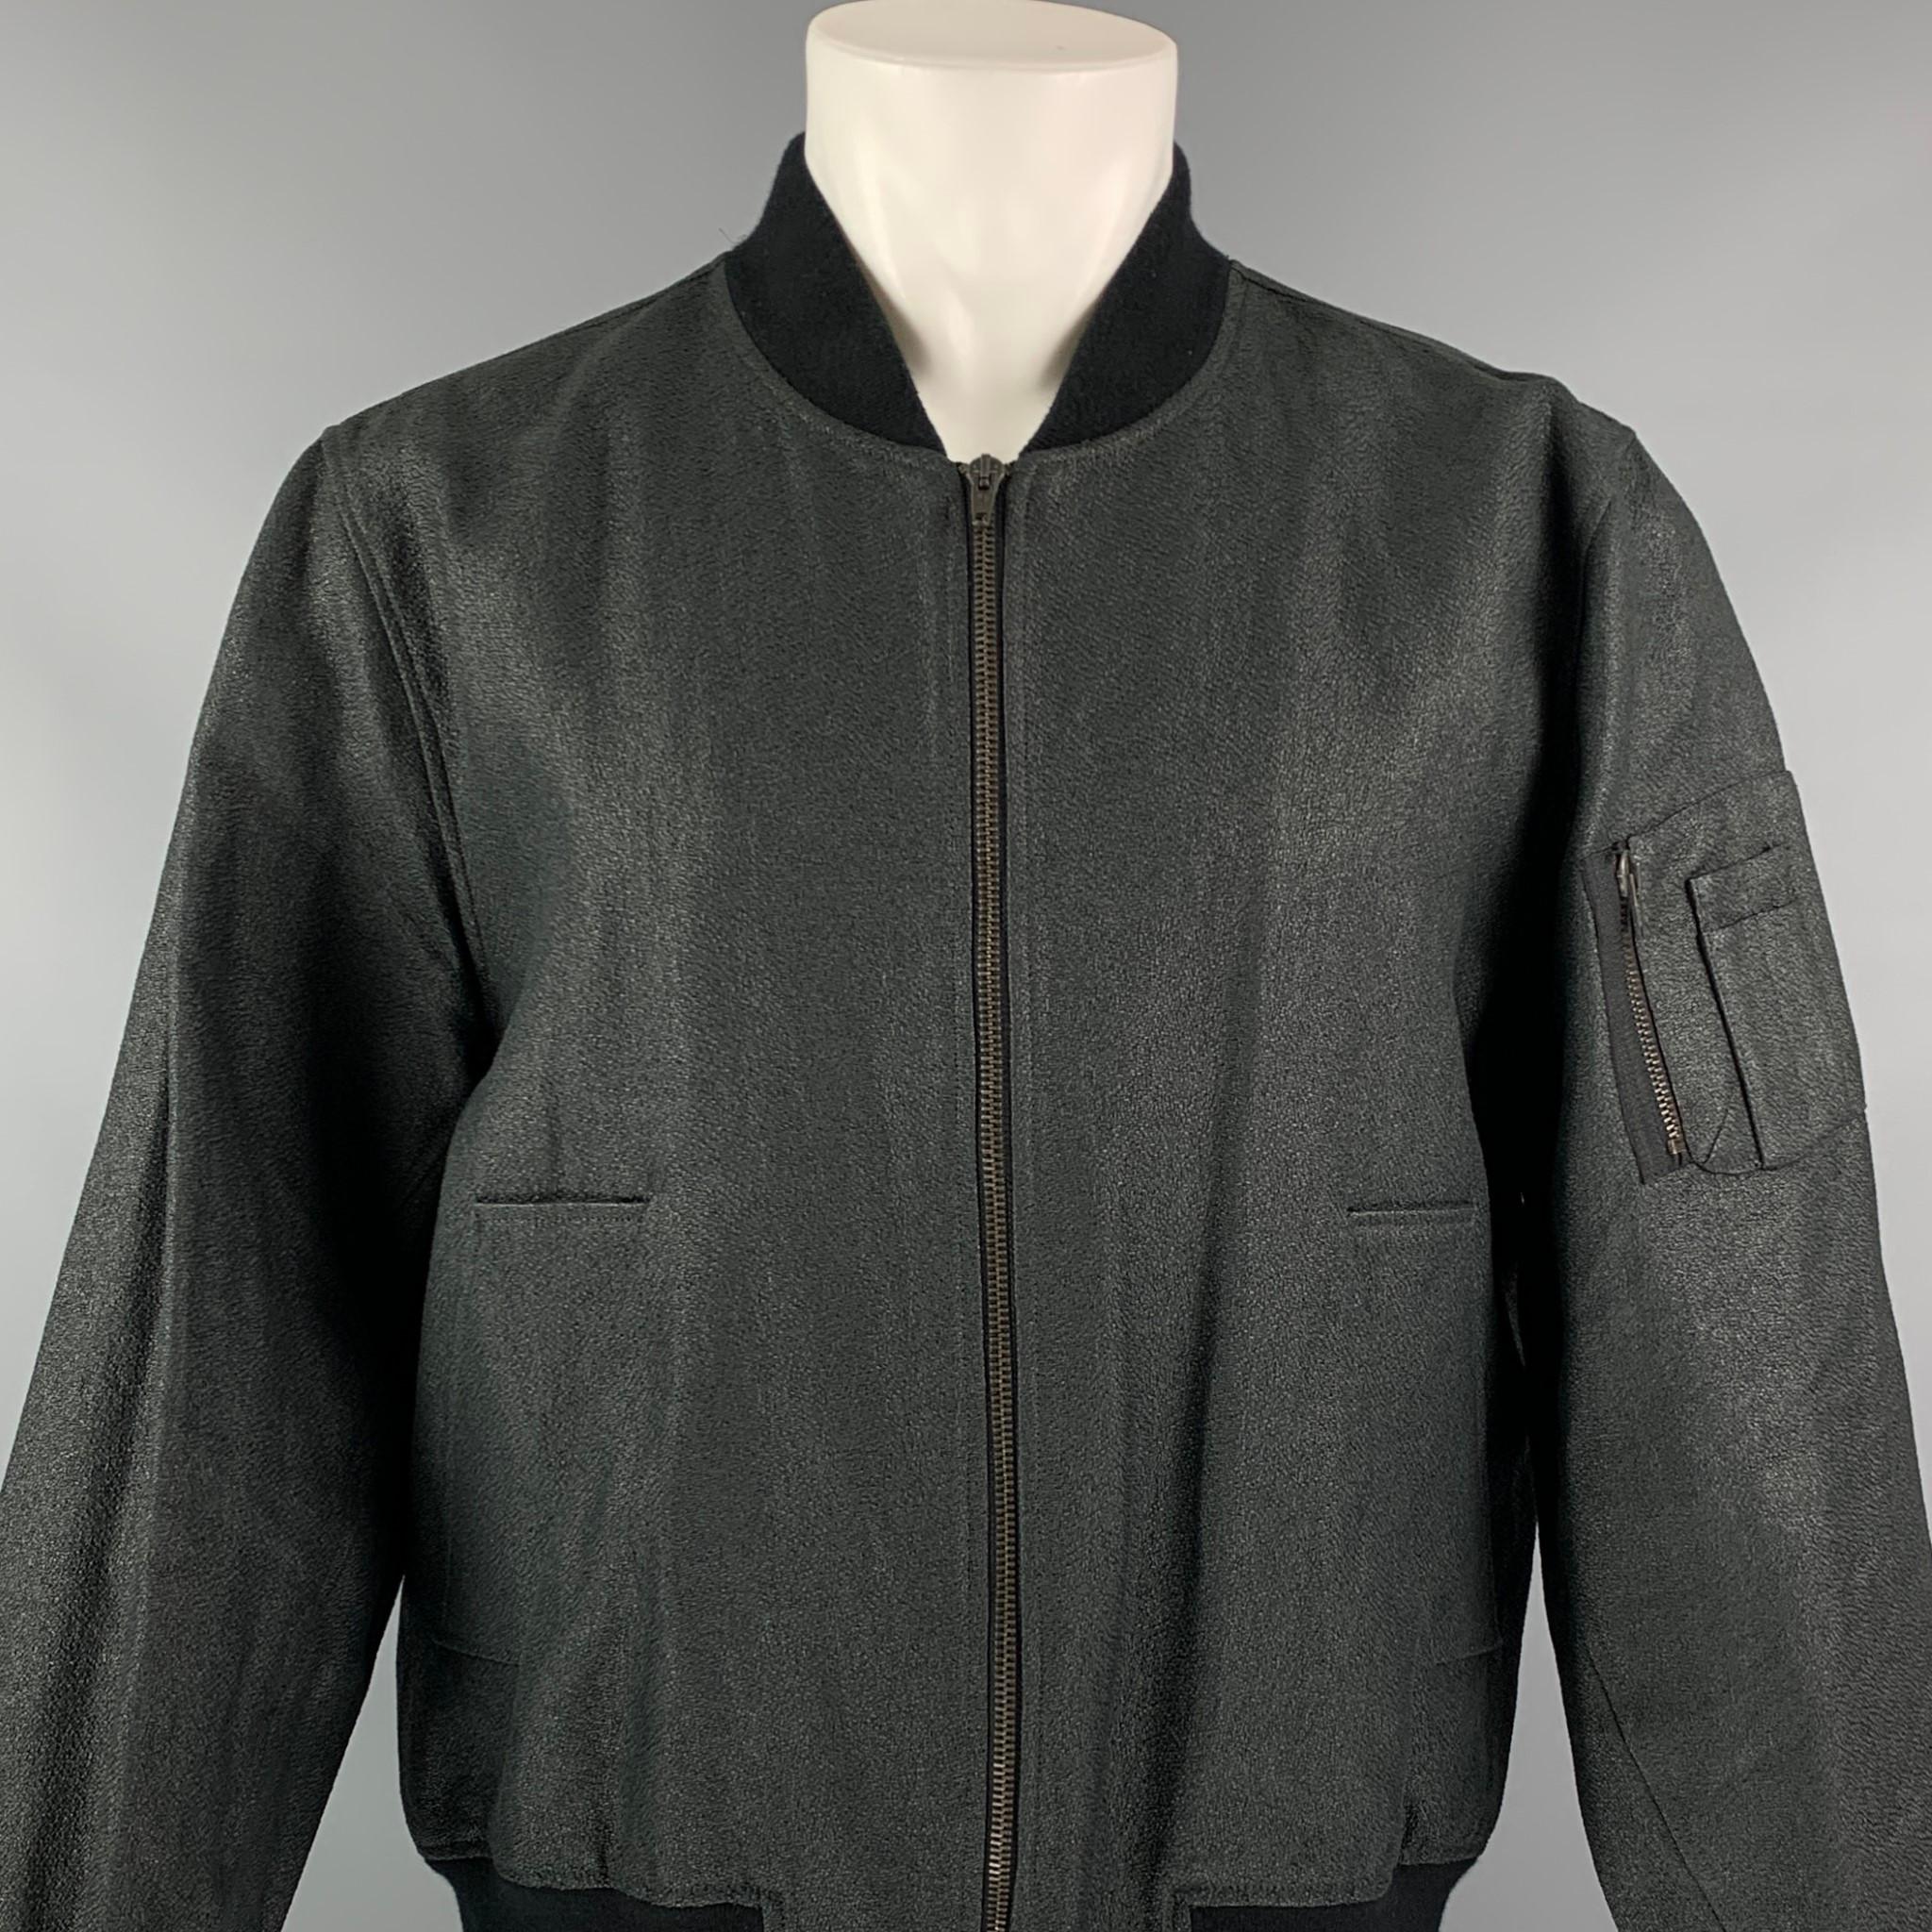 Raf Simons Black Bomber Jacket from the Spring/Summer 2009 menswear collection. Features dual welt pockets at front, zip pocket at sleeve, woven lining and zip closure at center front. Made in Belguim.

Excellent Pre-Owned Condition. No visible